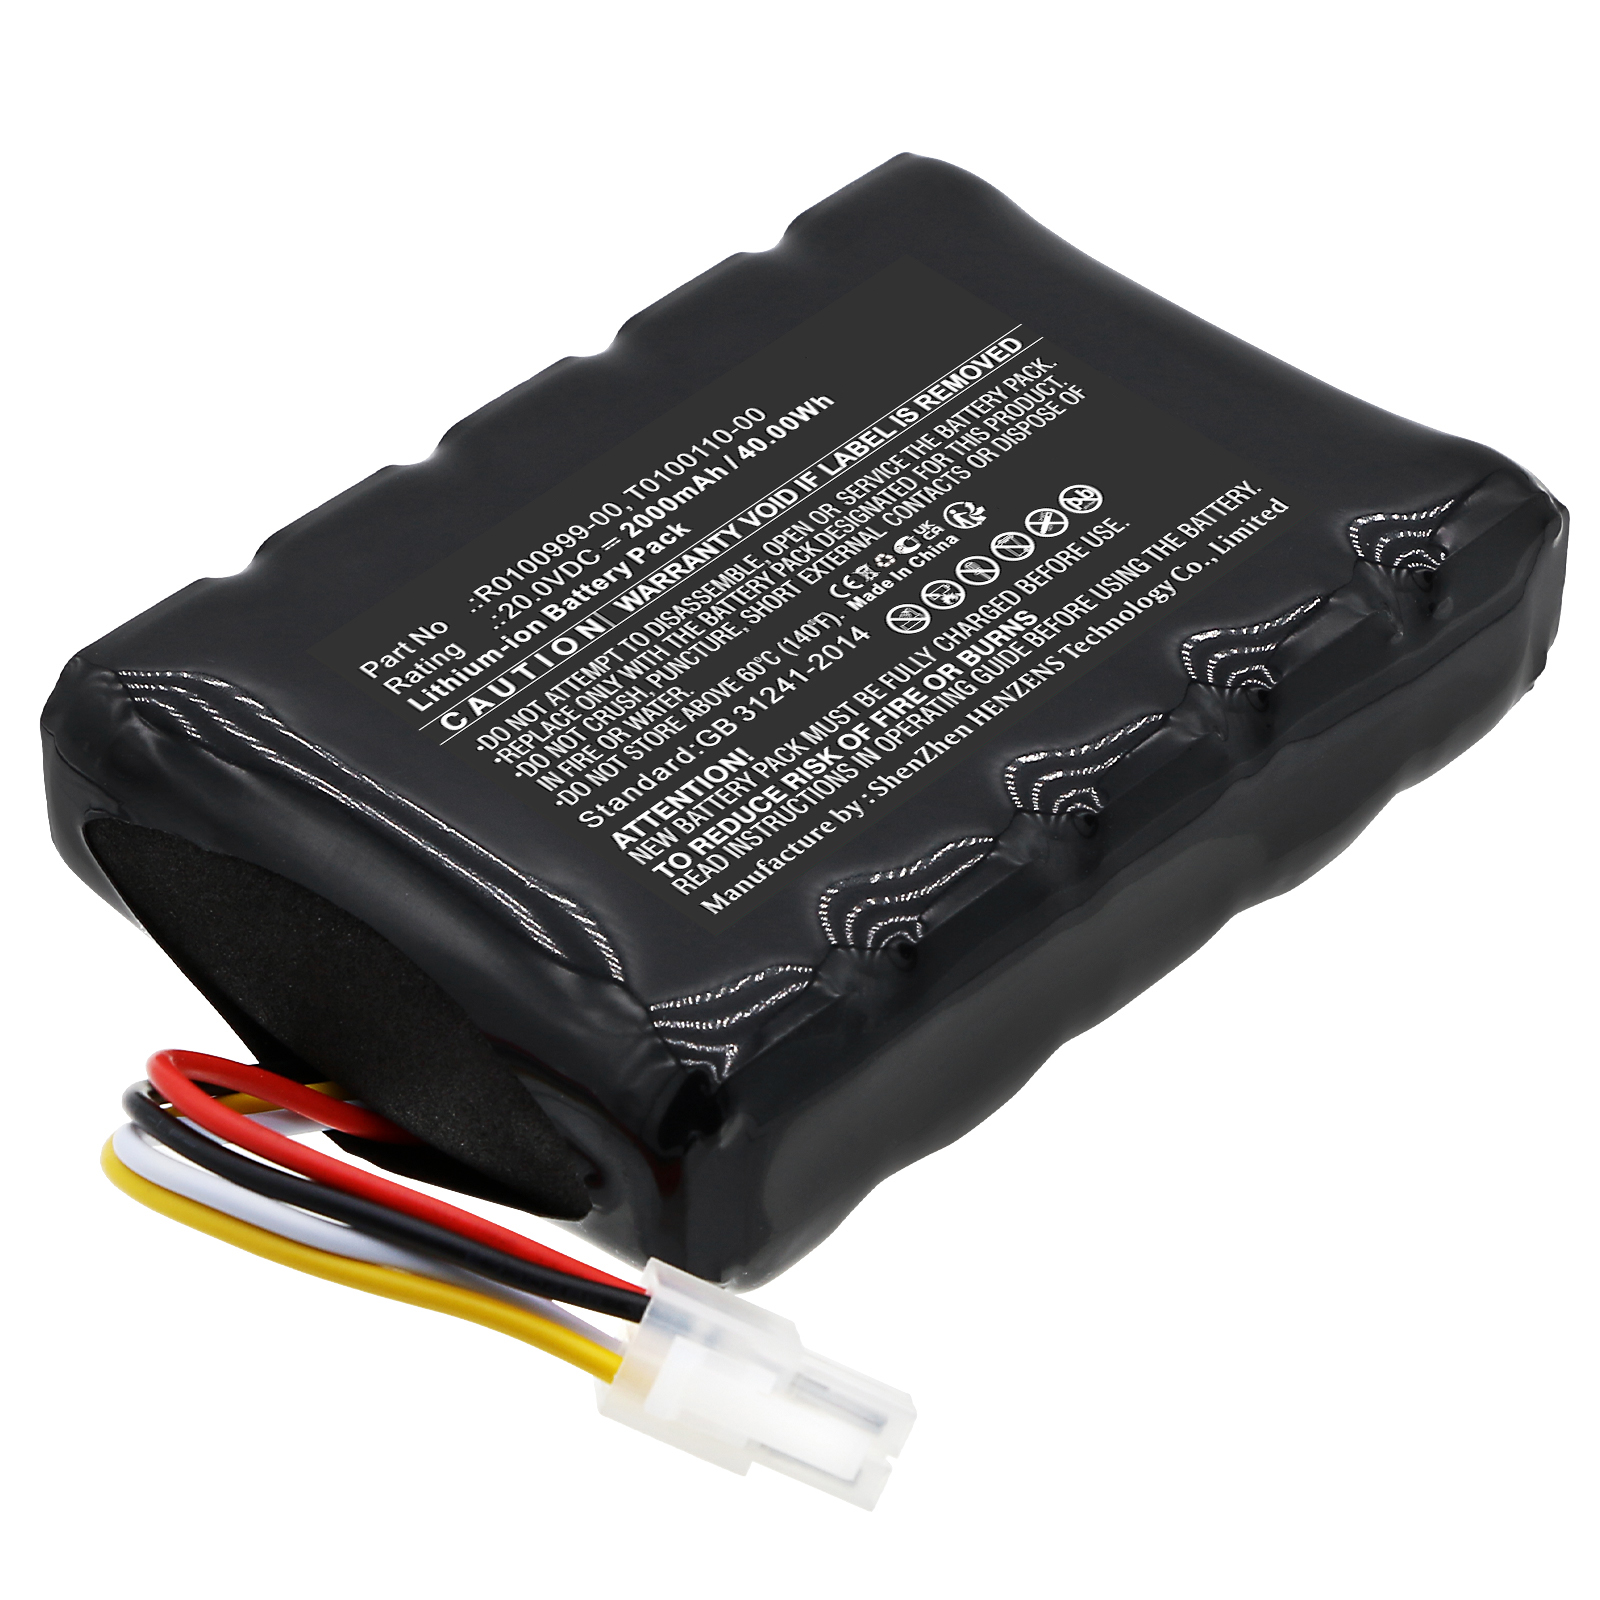 Synergy Digital Lawn Mower Battery, Compatible with Cramer R0100999-00 Lawn Mower Battery (Li-ion, 20V, 2000mAh)